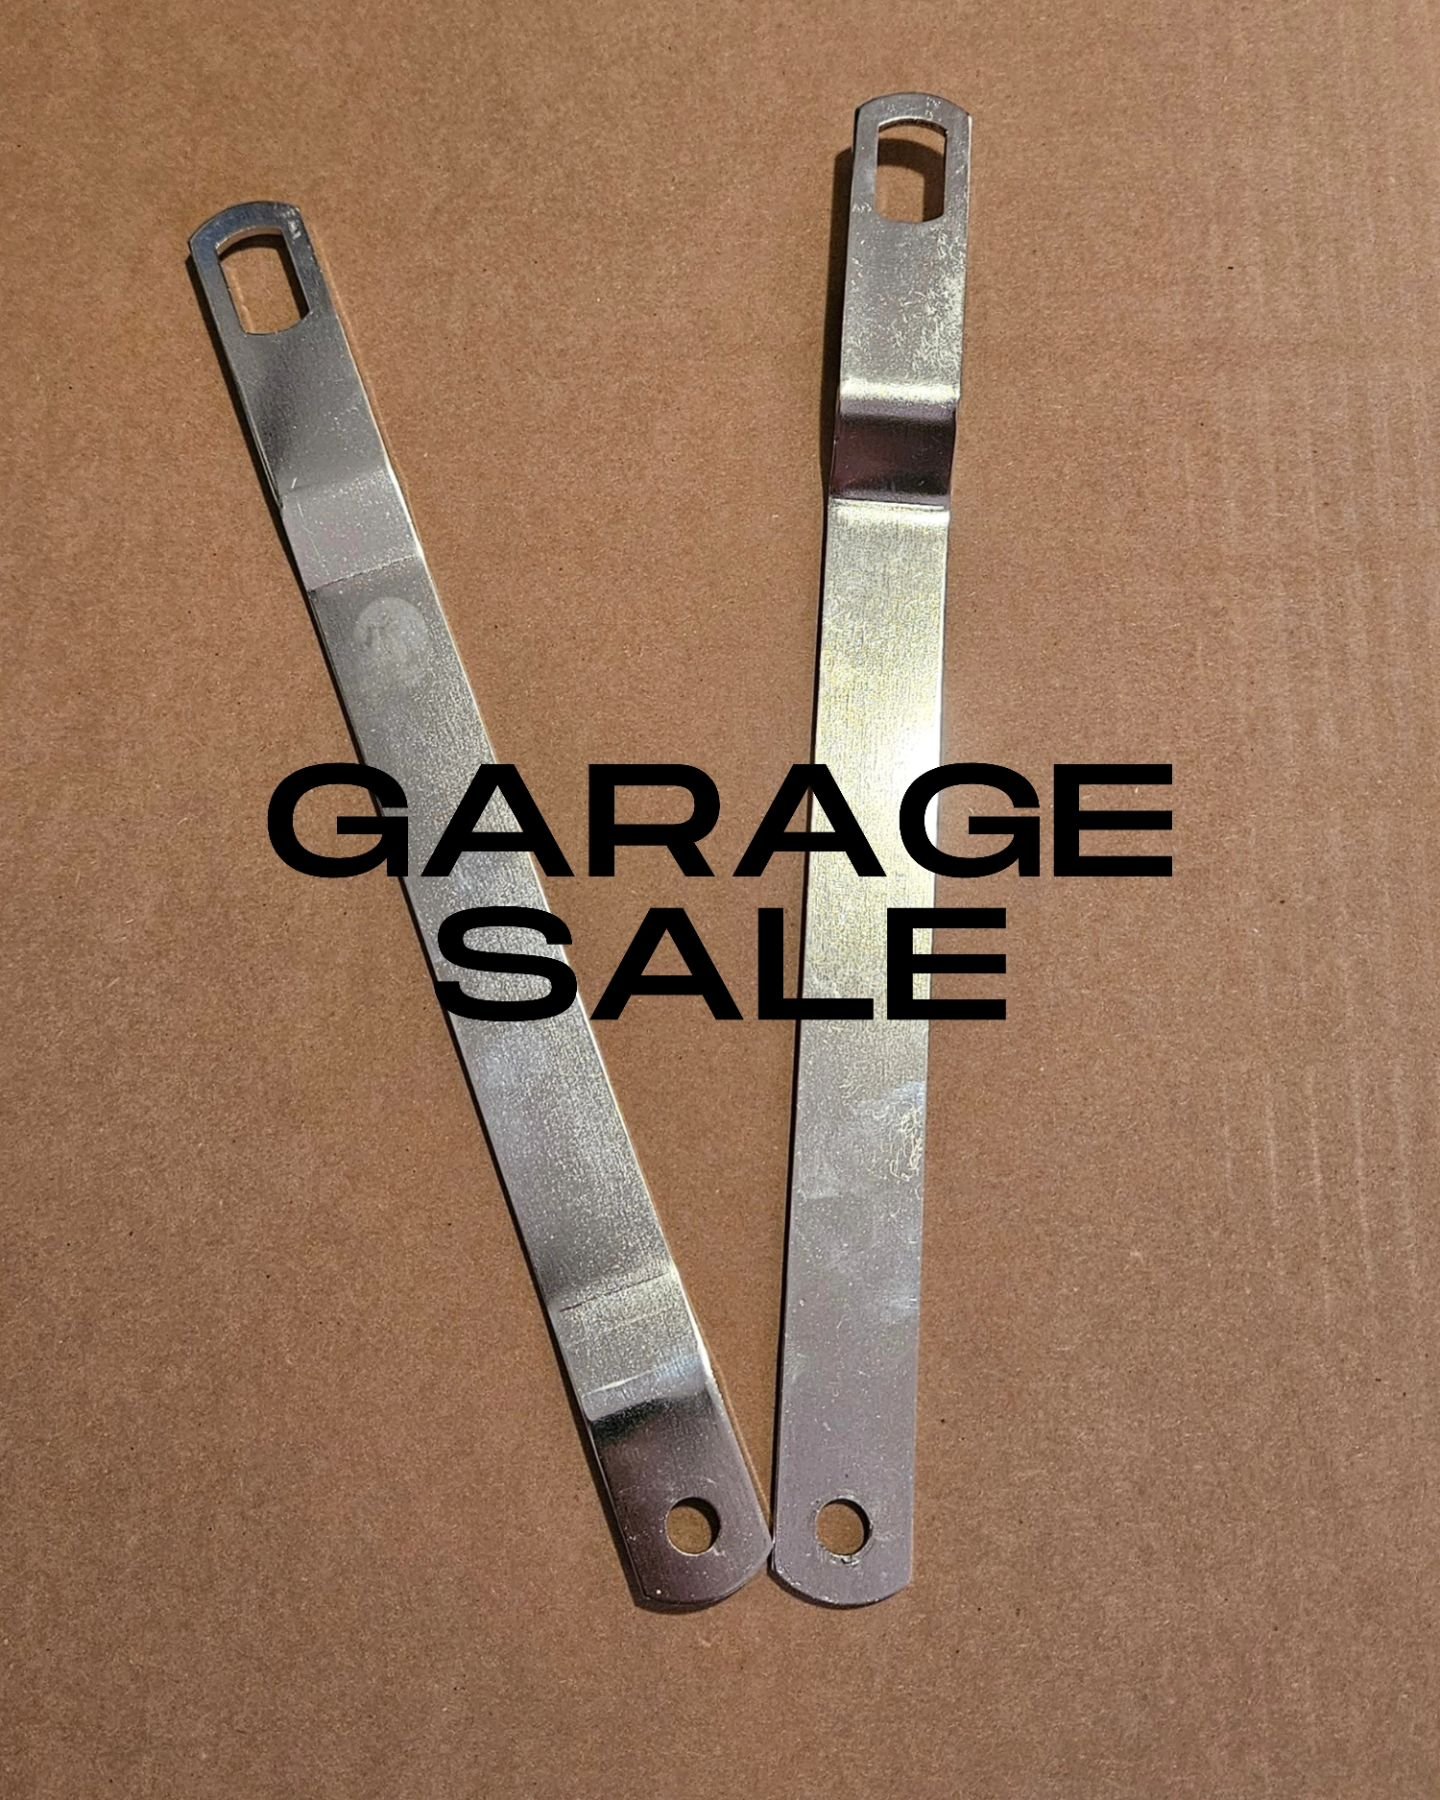 Check out these nickel plated FSJ truck tailgate straps a customer returned! These were plated by the customer and returned for wagon tailgate straps. Grab them from the Garage Sale section before they're gone!

Johnsonproductionjp.com 

#FullSizeJee